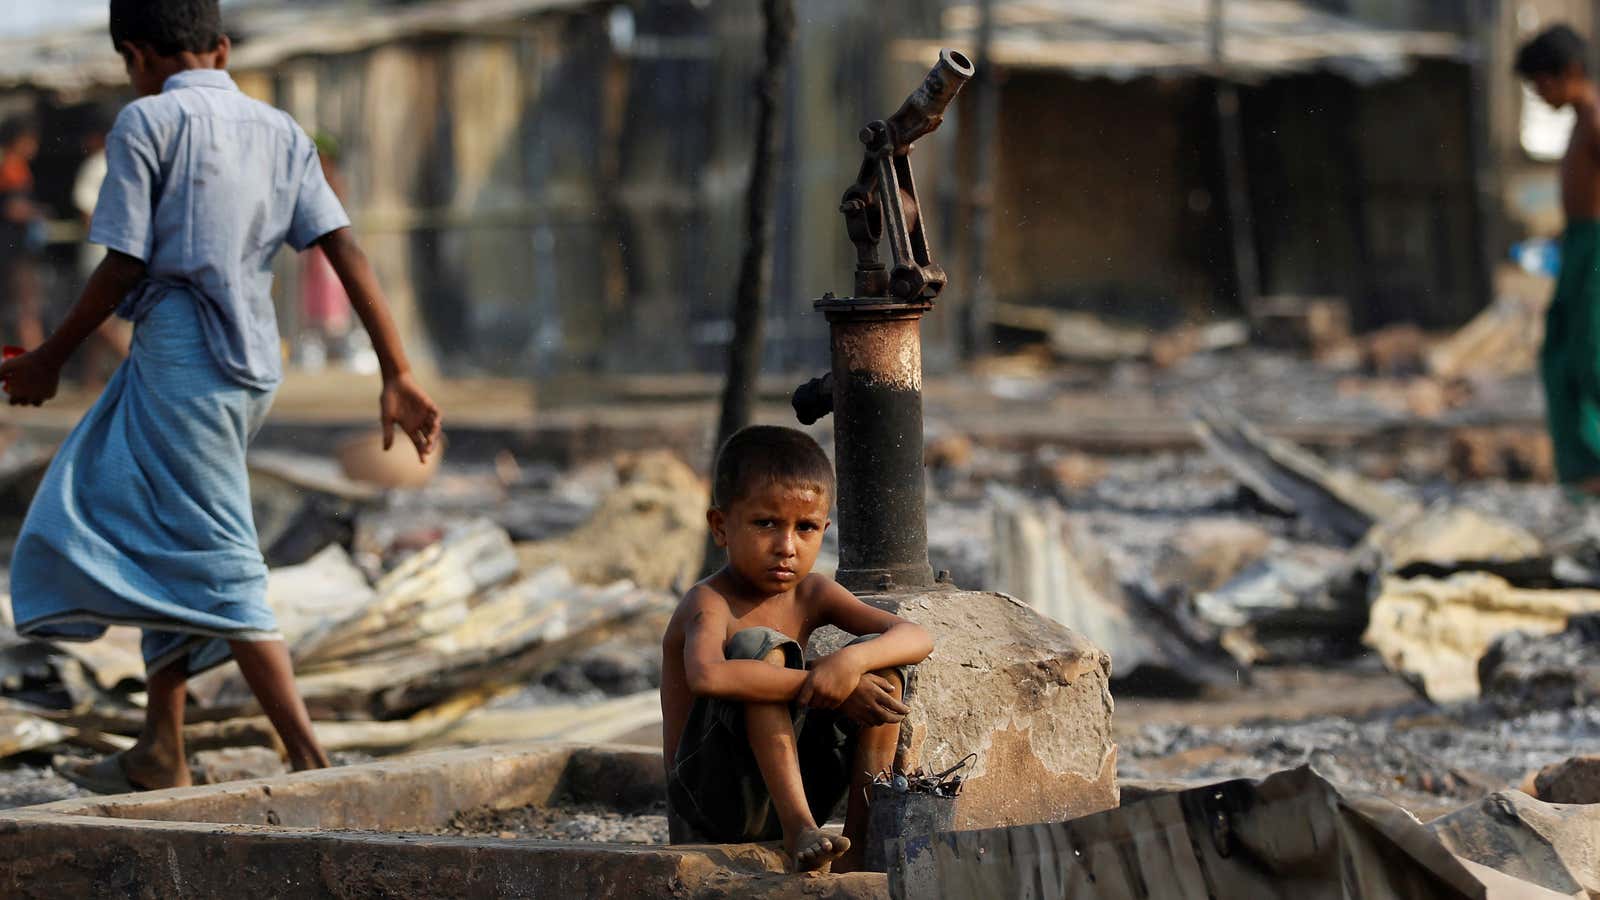 The aftermath of repeated fires, which have destroyed many camps for internally displaced Rohingya Muslims.